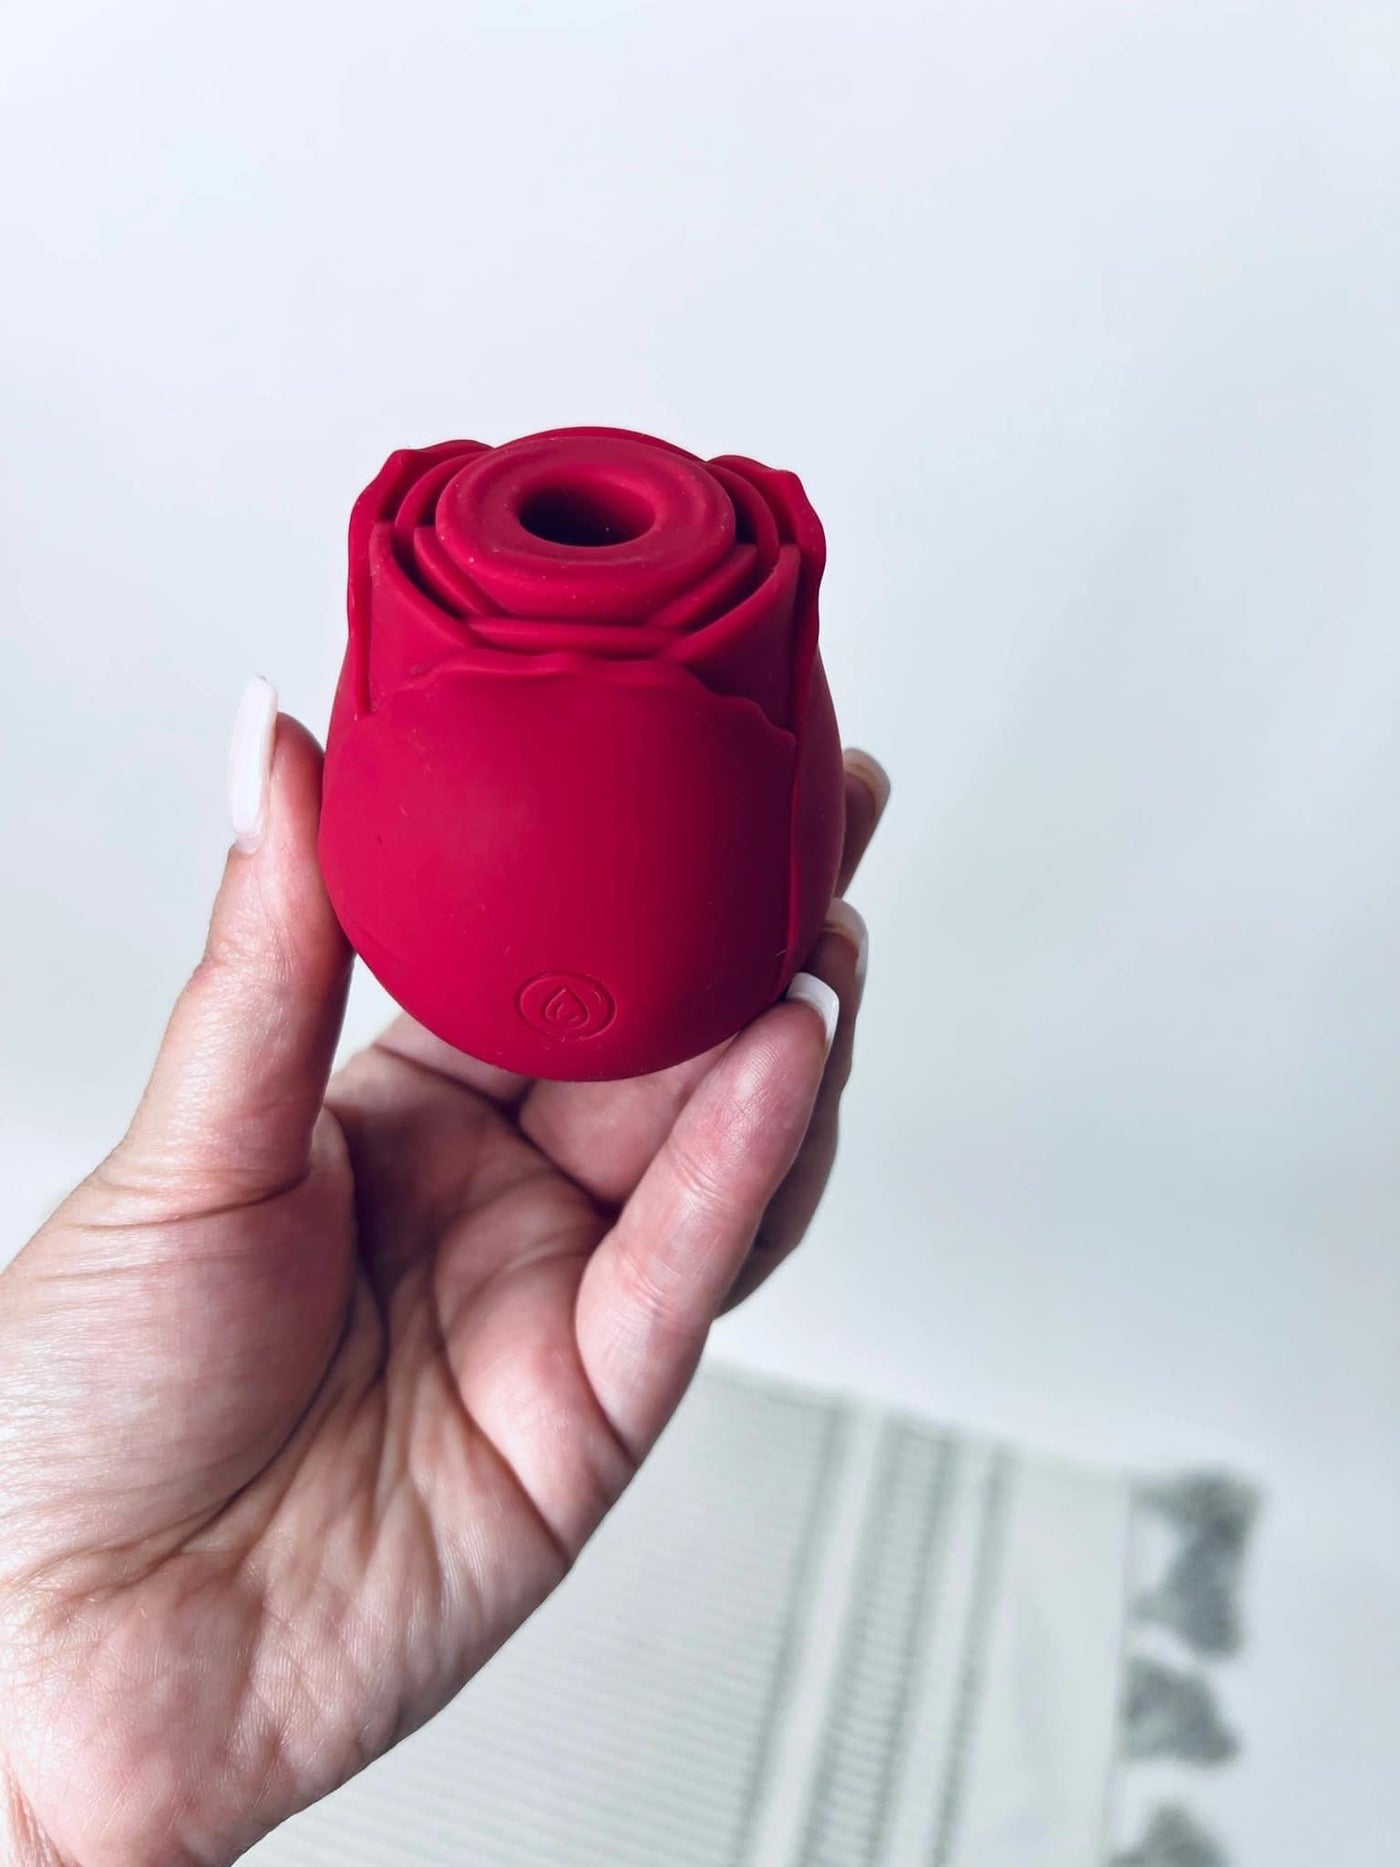 The "Not-a-Diffuser" Rose Toy 😉